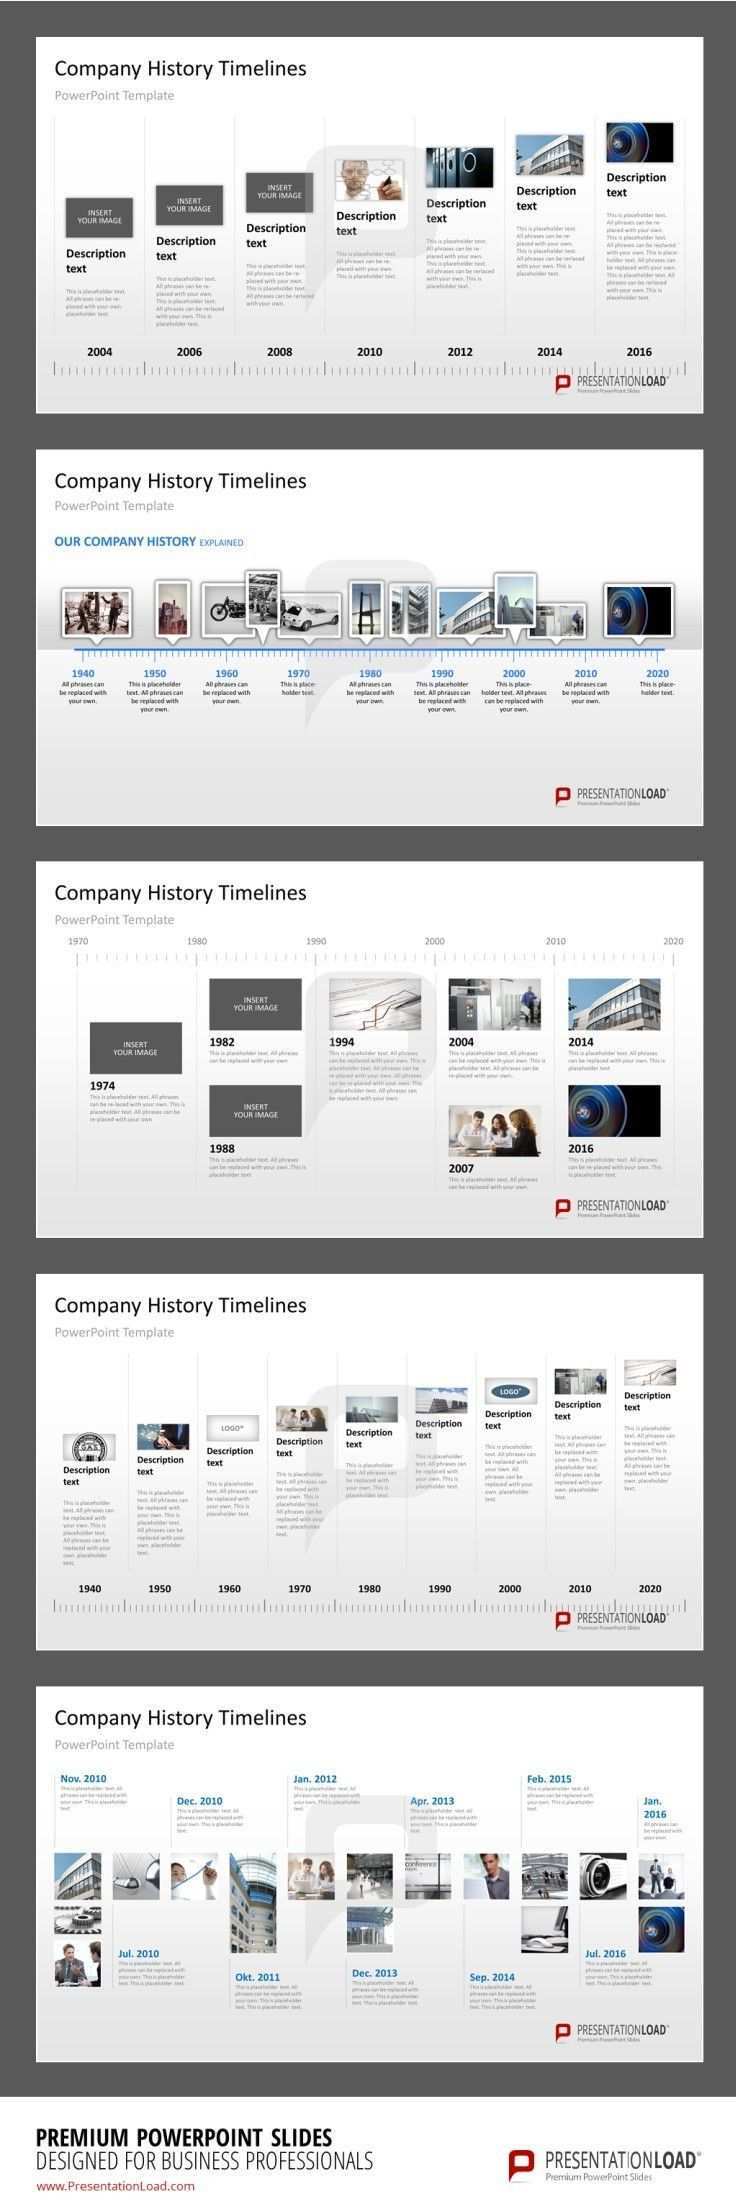 Company History Milestones In A Timeline Powerpoint Template Presentationload Www Presentationl Timeline Design History Design Timeline Infographic